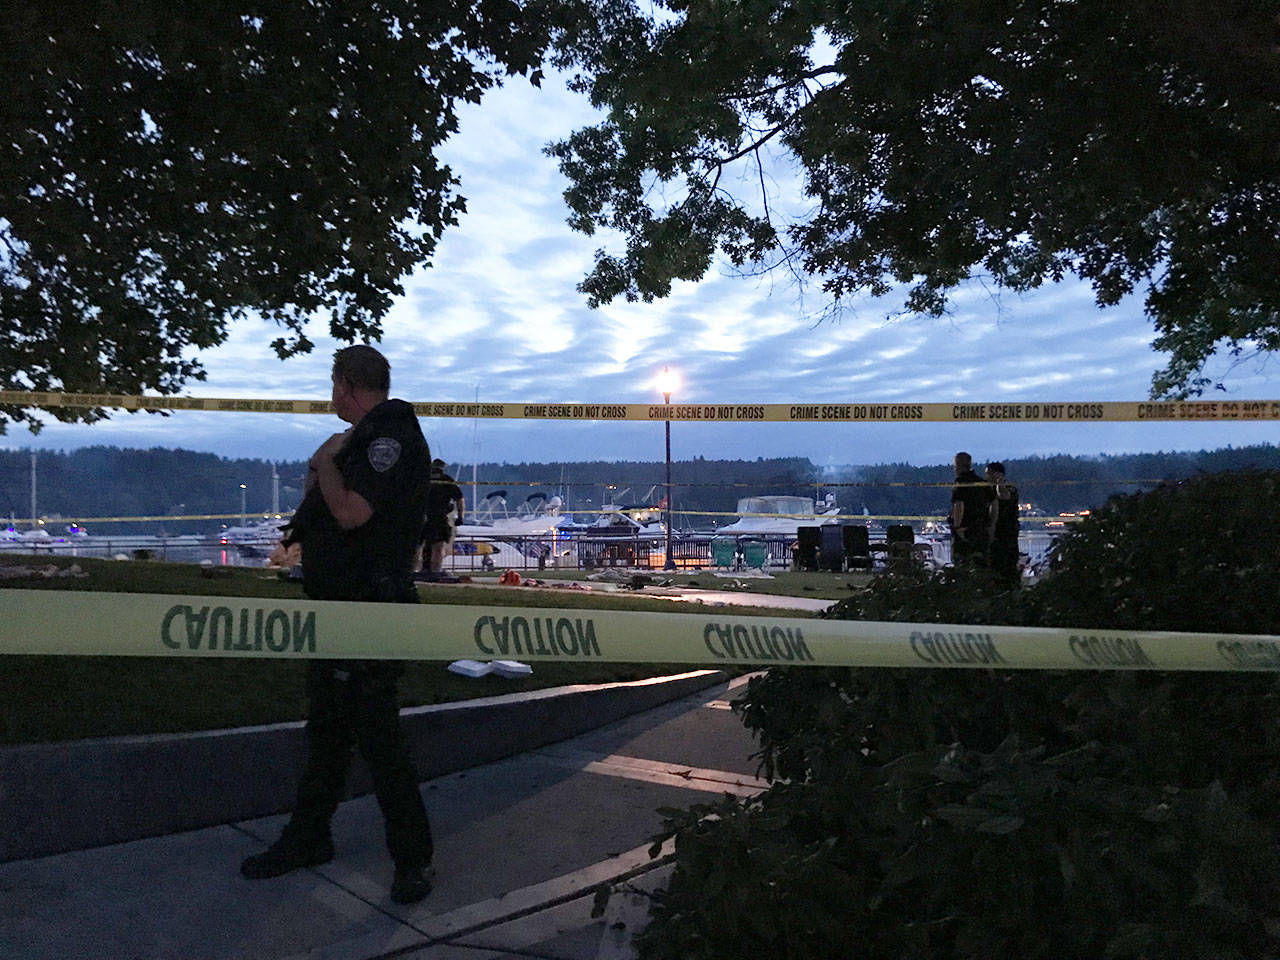 Poulsbo PD taped off the south end of the waterfront park in Poulsbo following the officer-involved shooting on July 3. (photo by Ken Park)